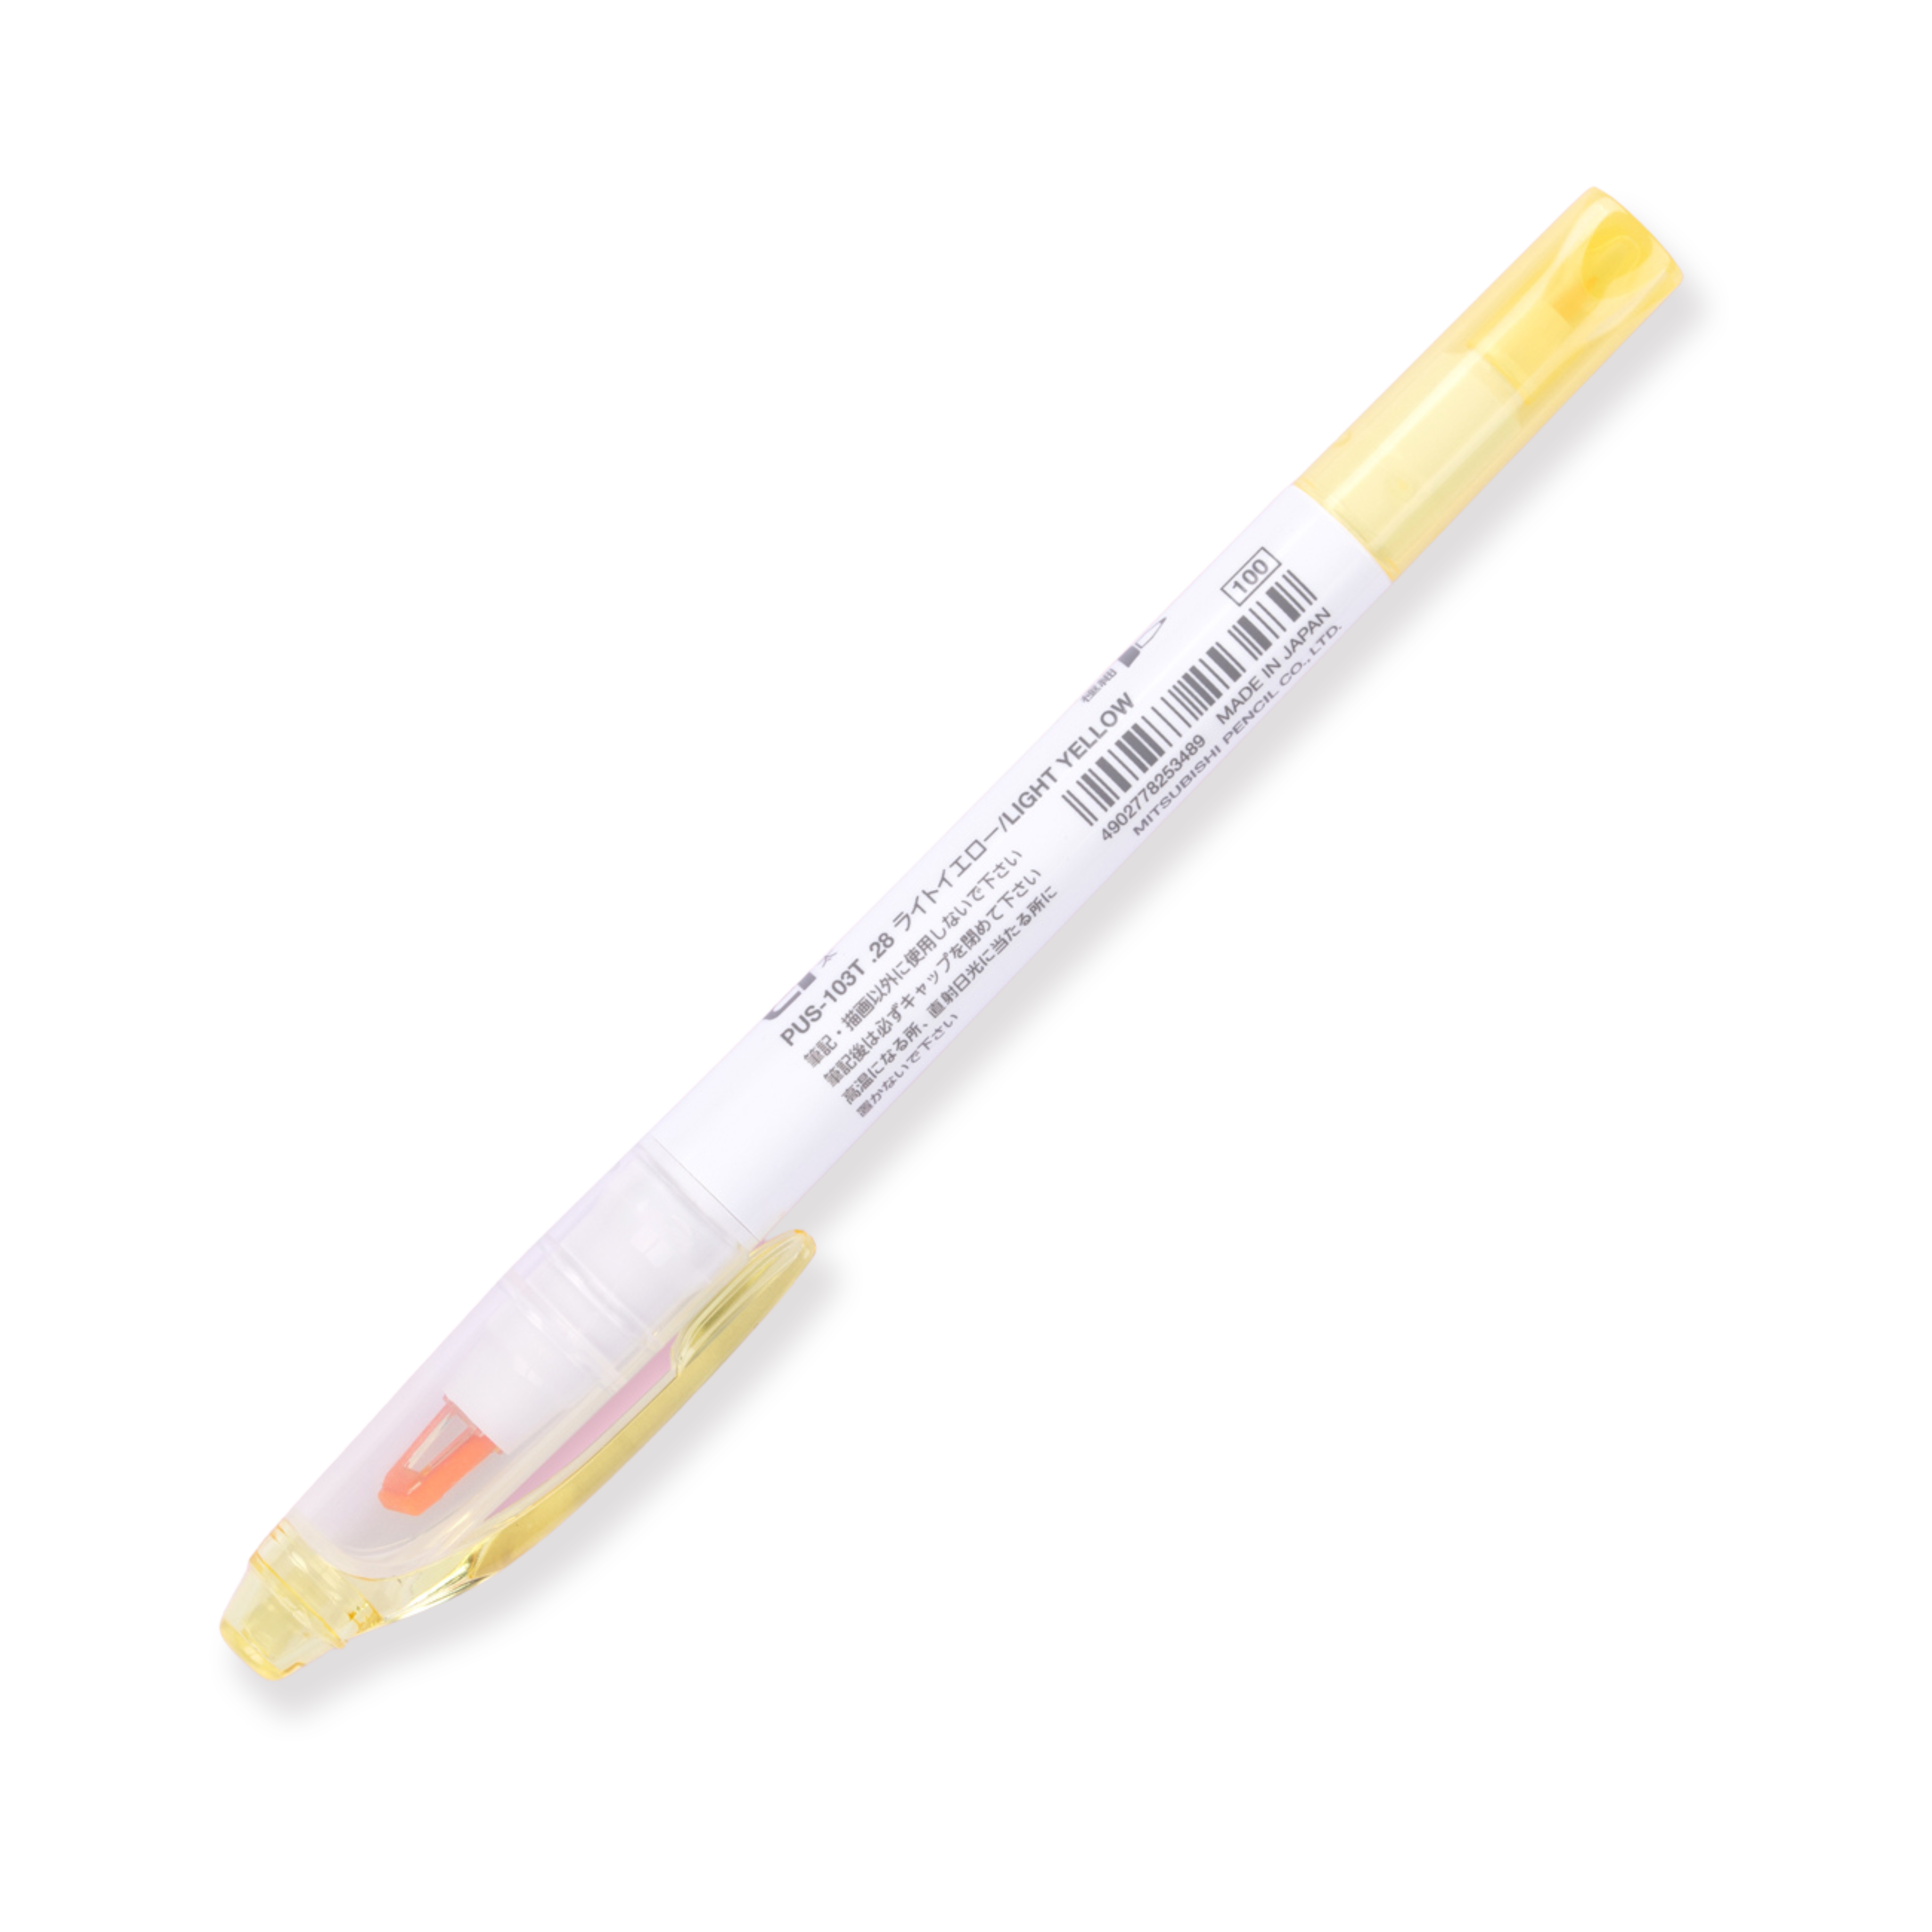 Uni Propus Window Double-Sided Highlighter - Light Yellow - 2020 New Color